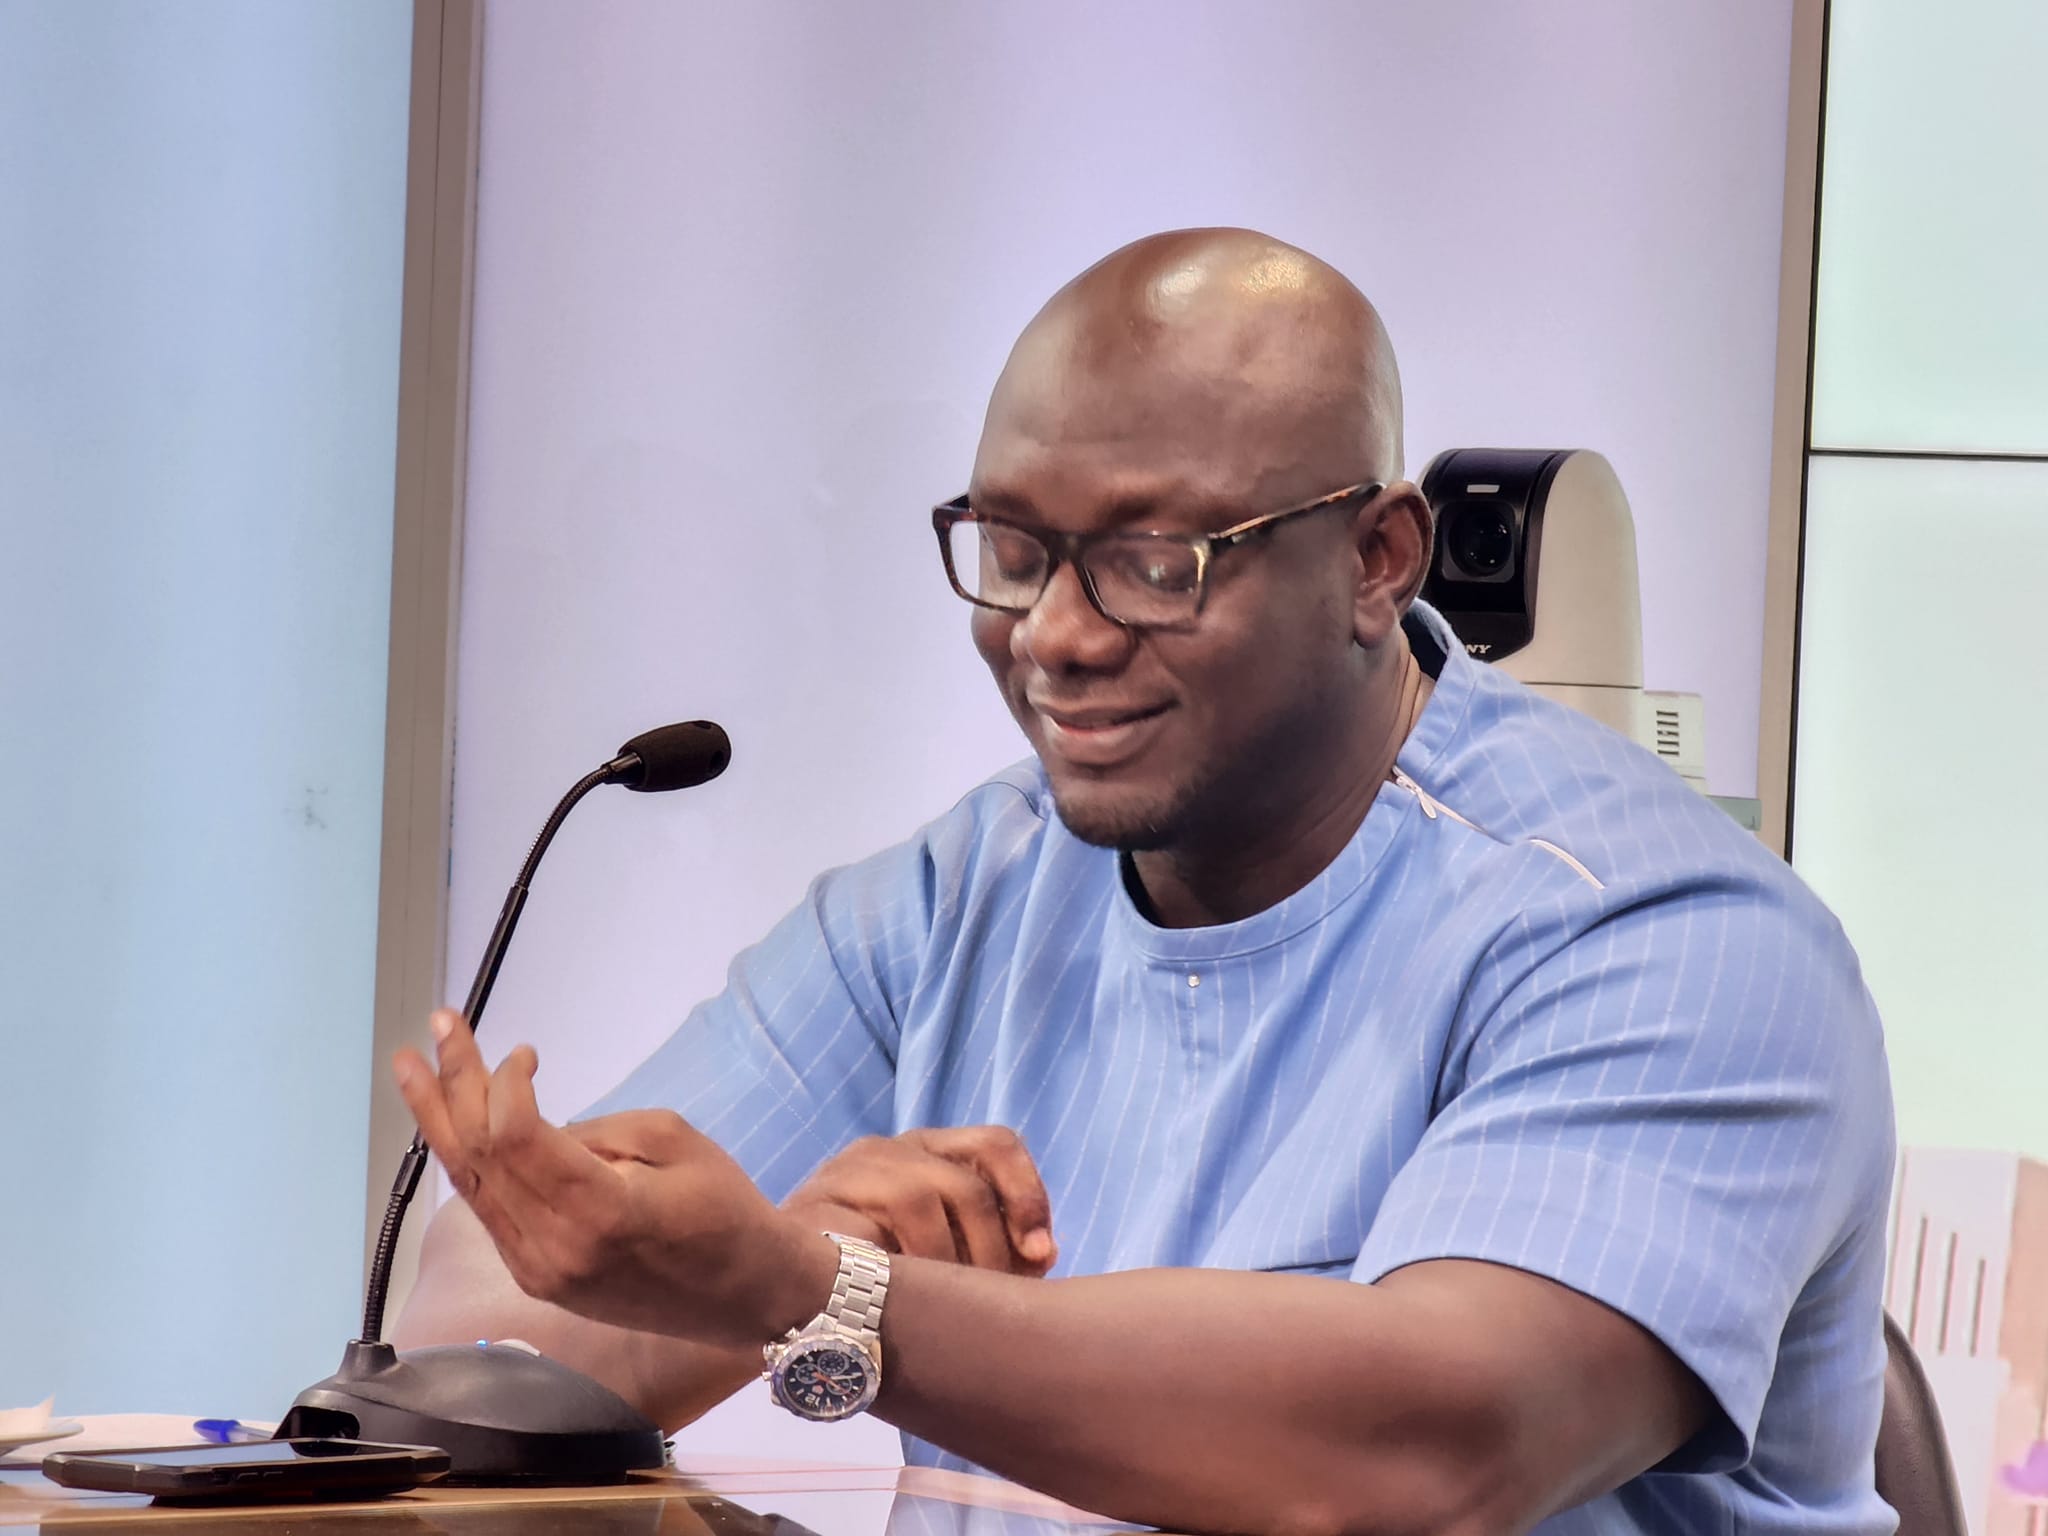 Bawumia is the right man to lead the country- NPP’s Eric Amoako Twum